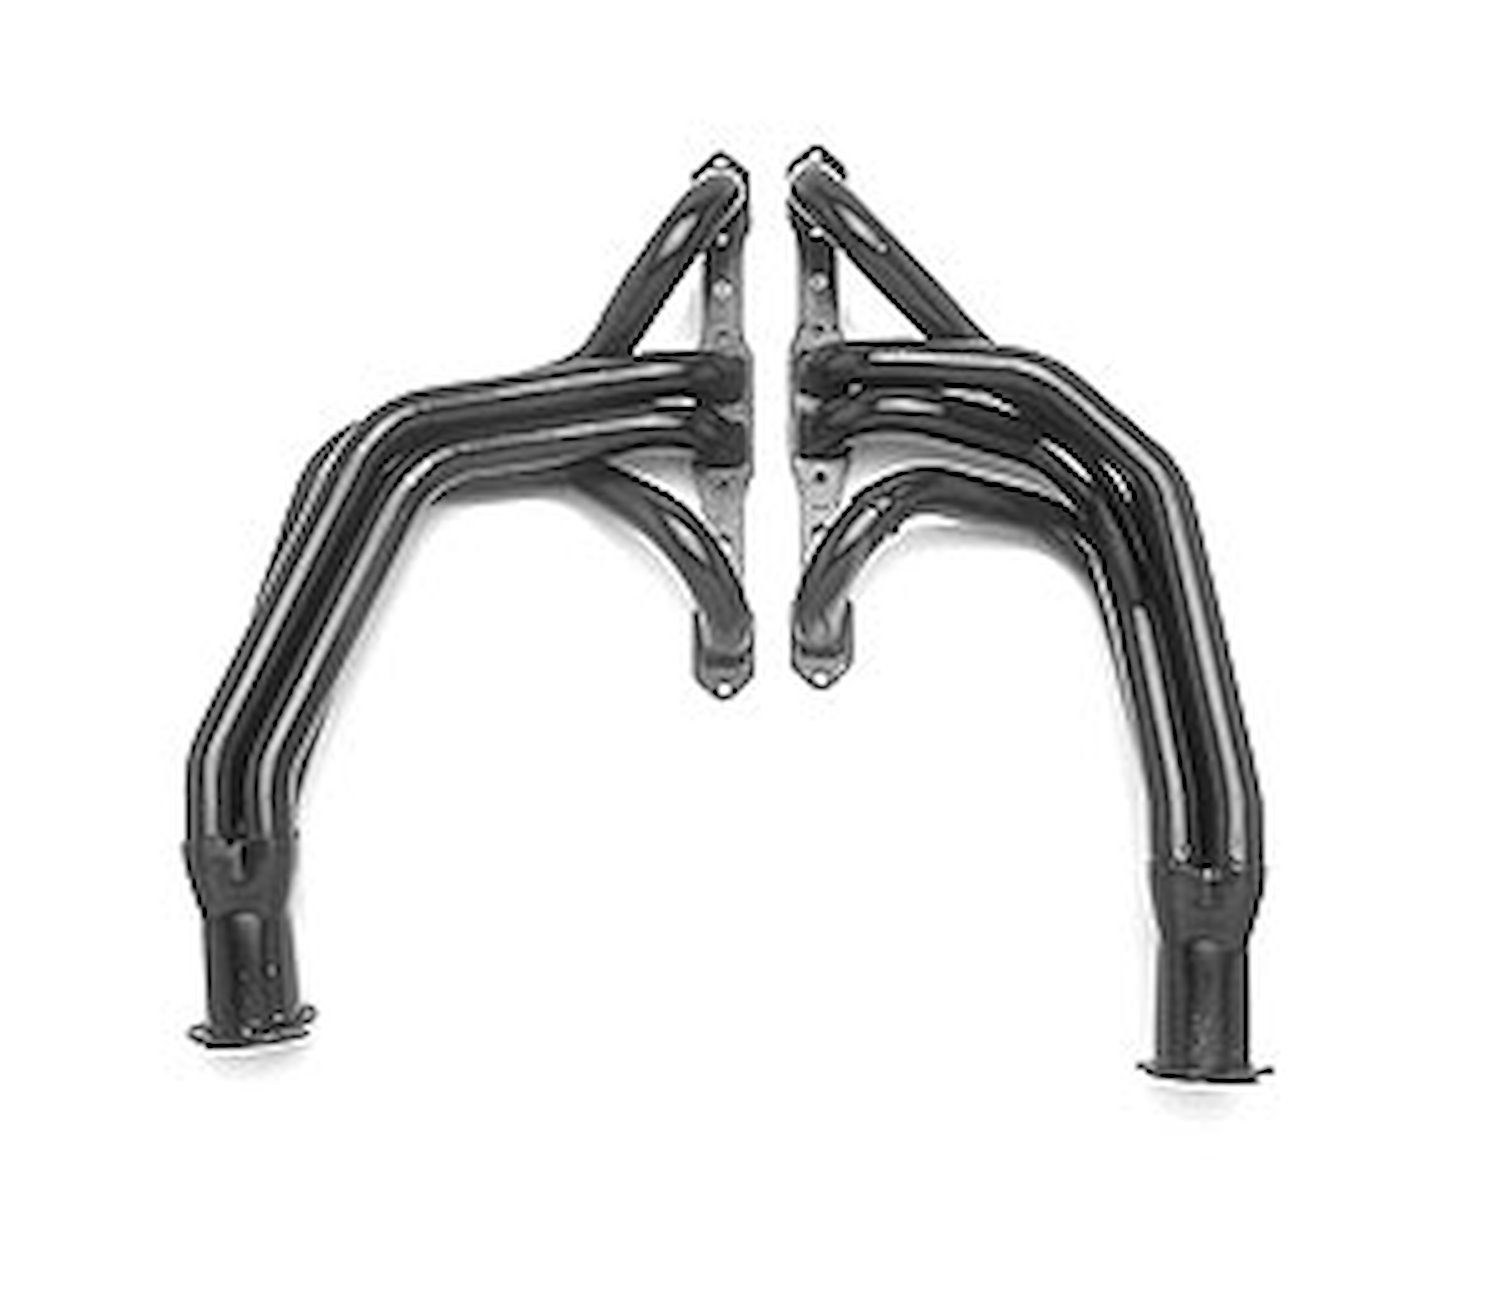 Standard Duty Uncoated Headers for 1974-78 Ramcharger & Trailduster 4WD 361-440